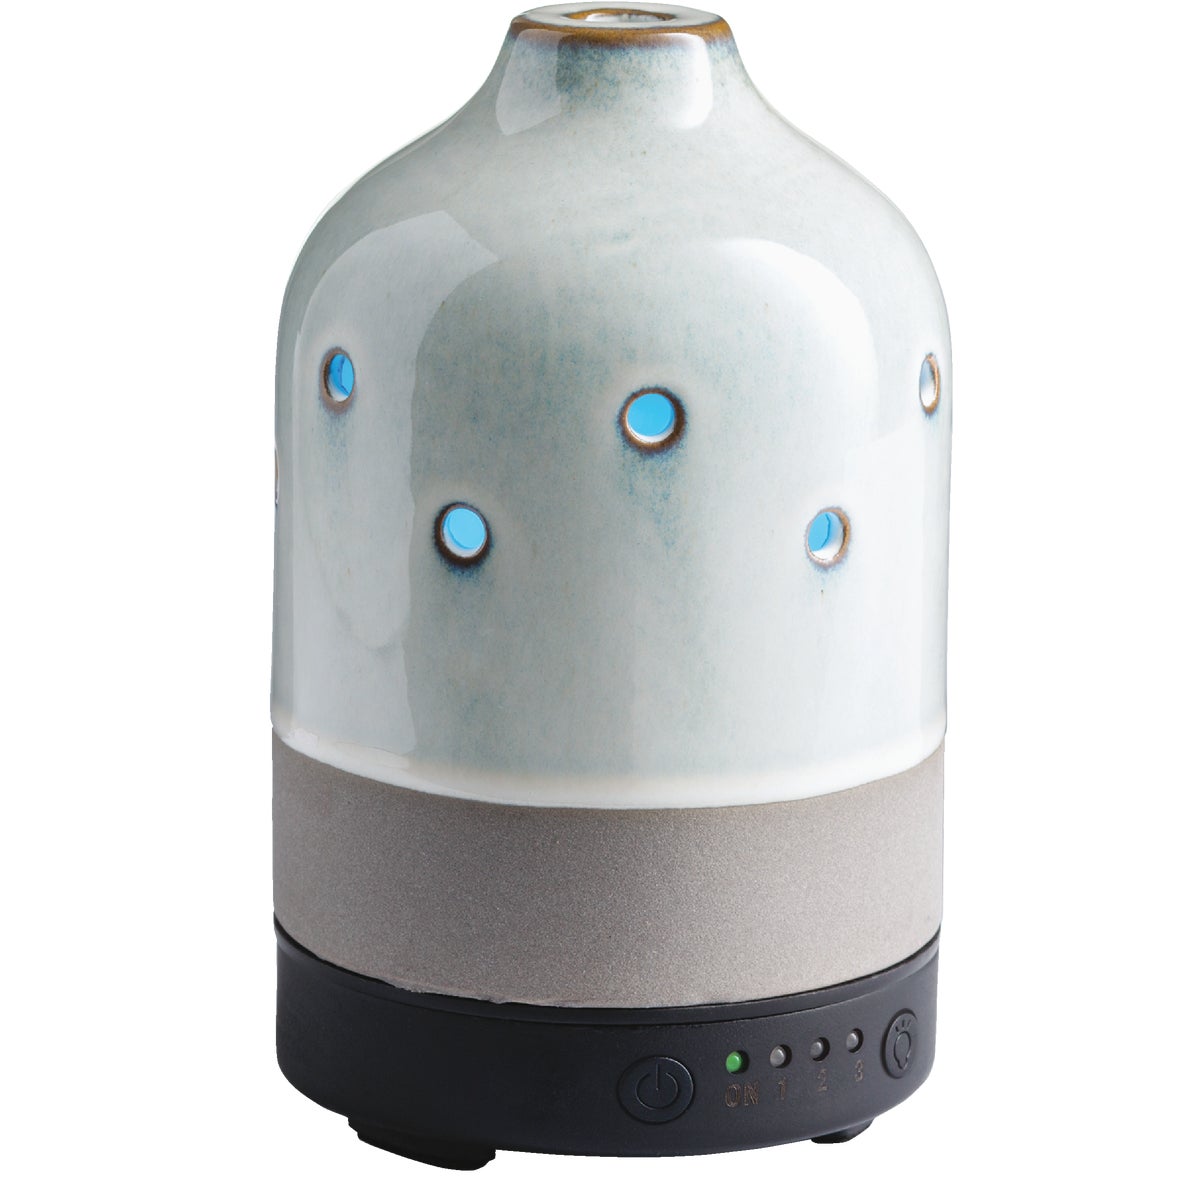 Airome Ultra Sonic Essential Oil Diffuser with Timer - Glazed Concrete